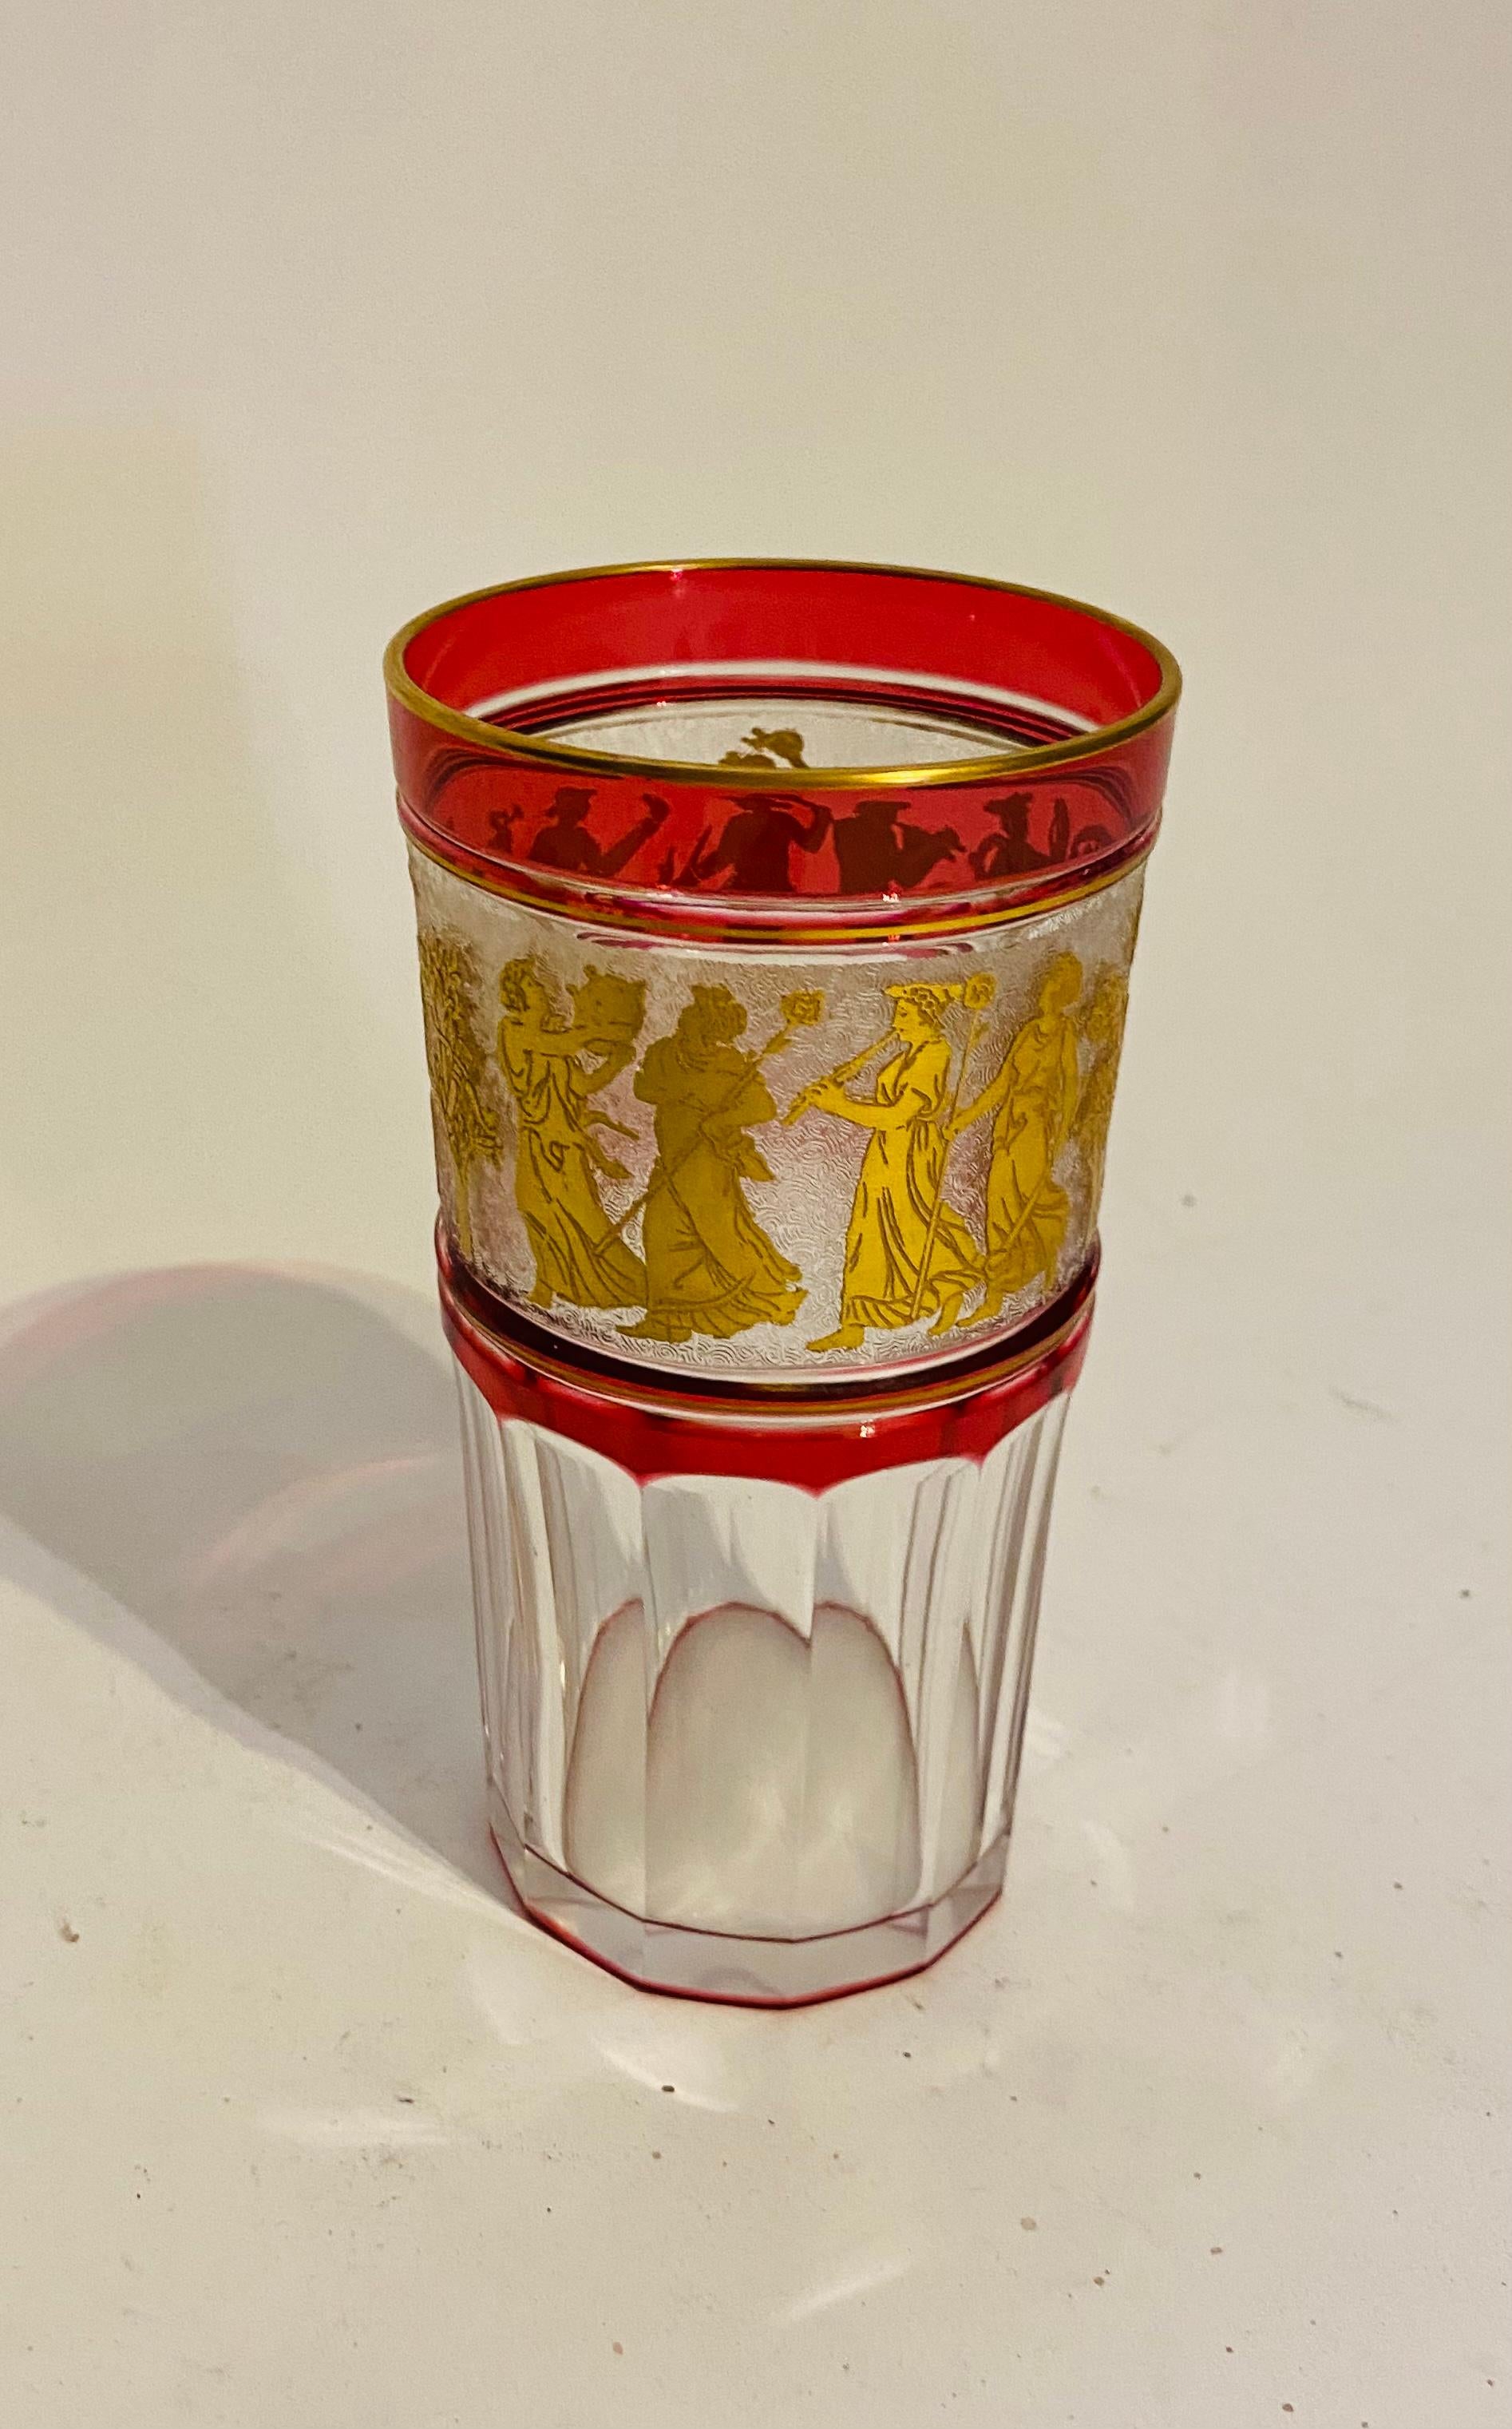 A great set of 11 Bar or water glasses from the premier crystal firm of Val Saint Lambert. This is one of their classic designs of gilt Greco Roman cameo figures dancing on an acid etched back ground surrounded by a rich ruby/cranberry color.